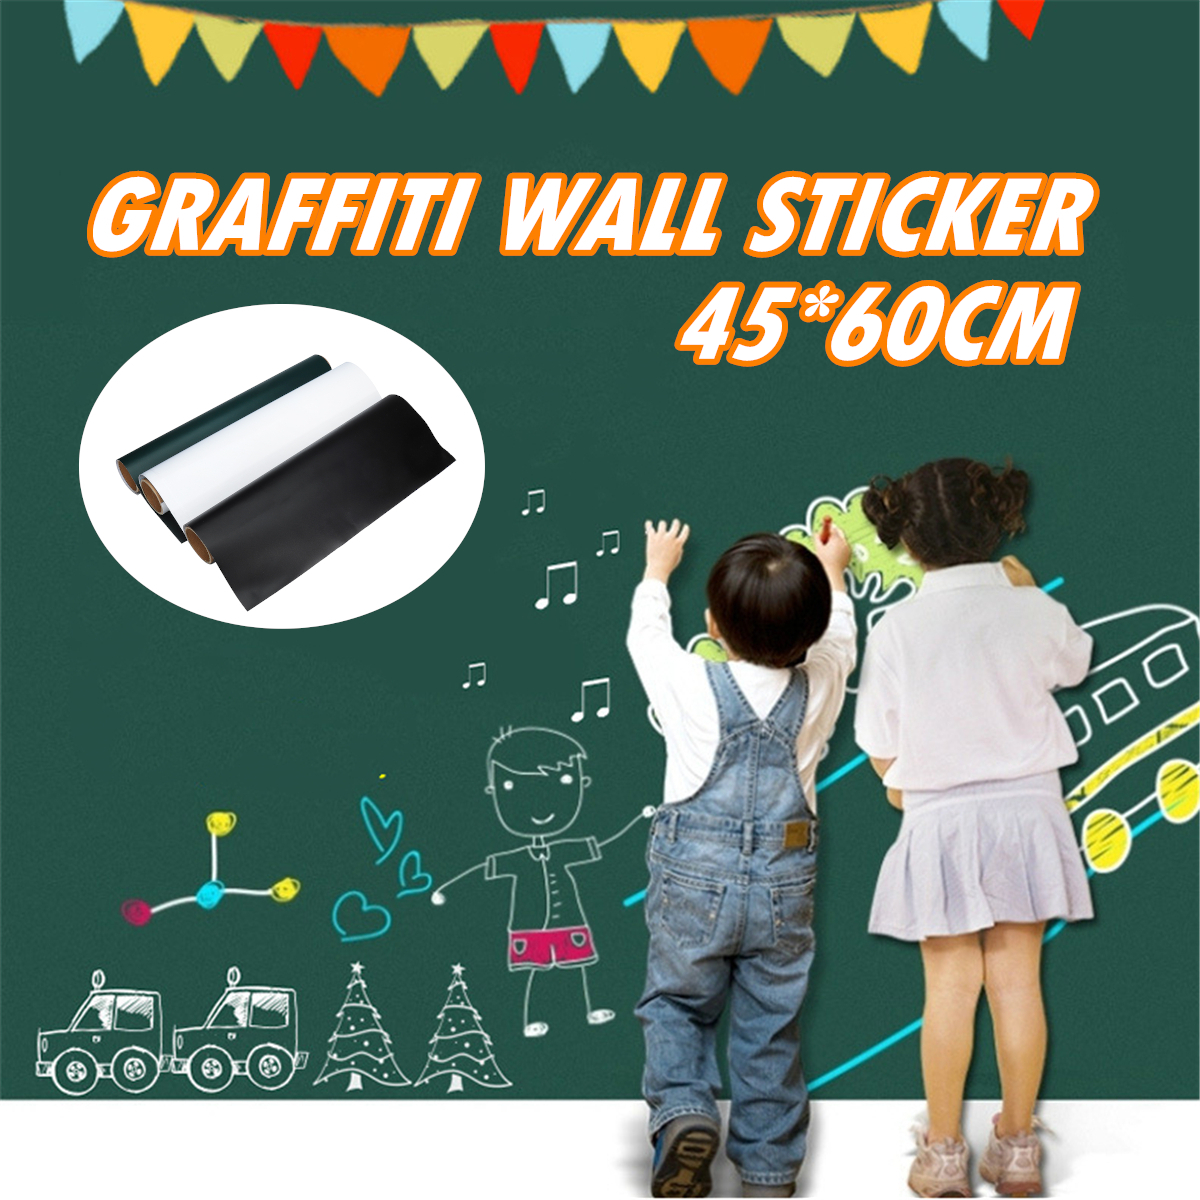 4560cm-Wall-Sticker-Magnet-Board-Drawing--DIY-Room-Wall-Decor-Decal-Home-Living-Room-1646612-1